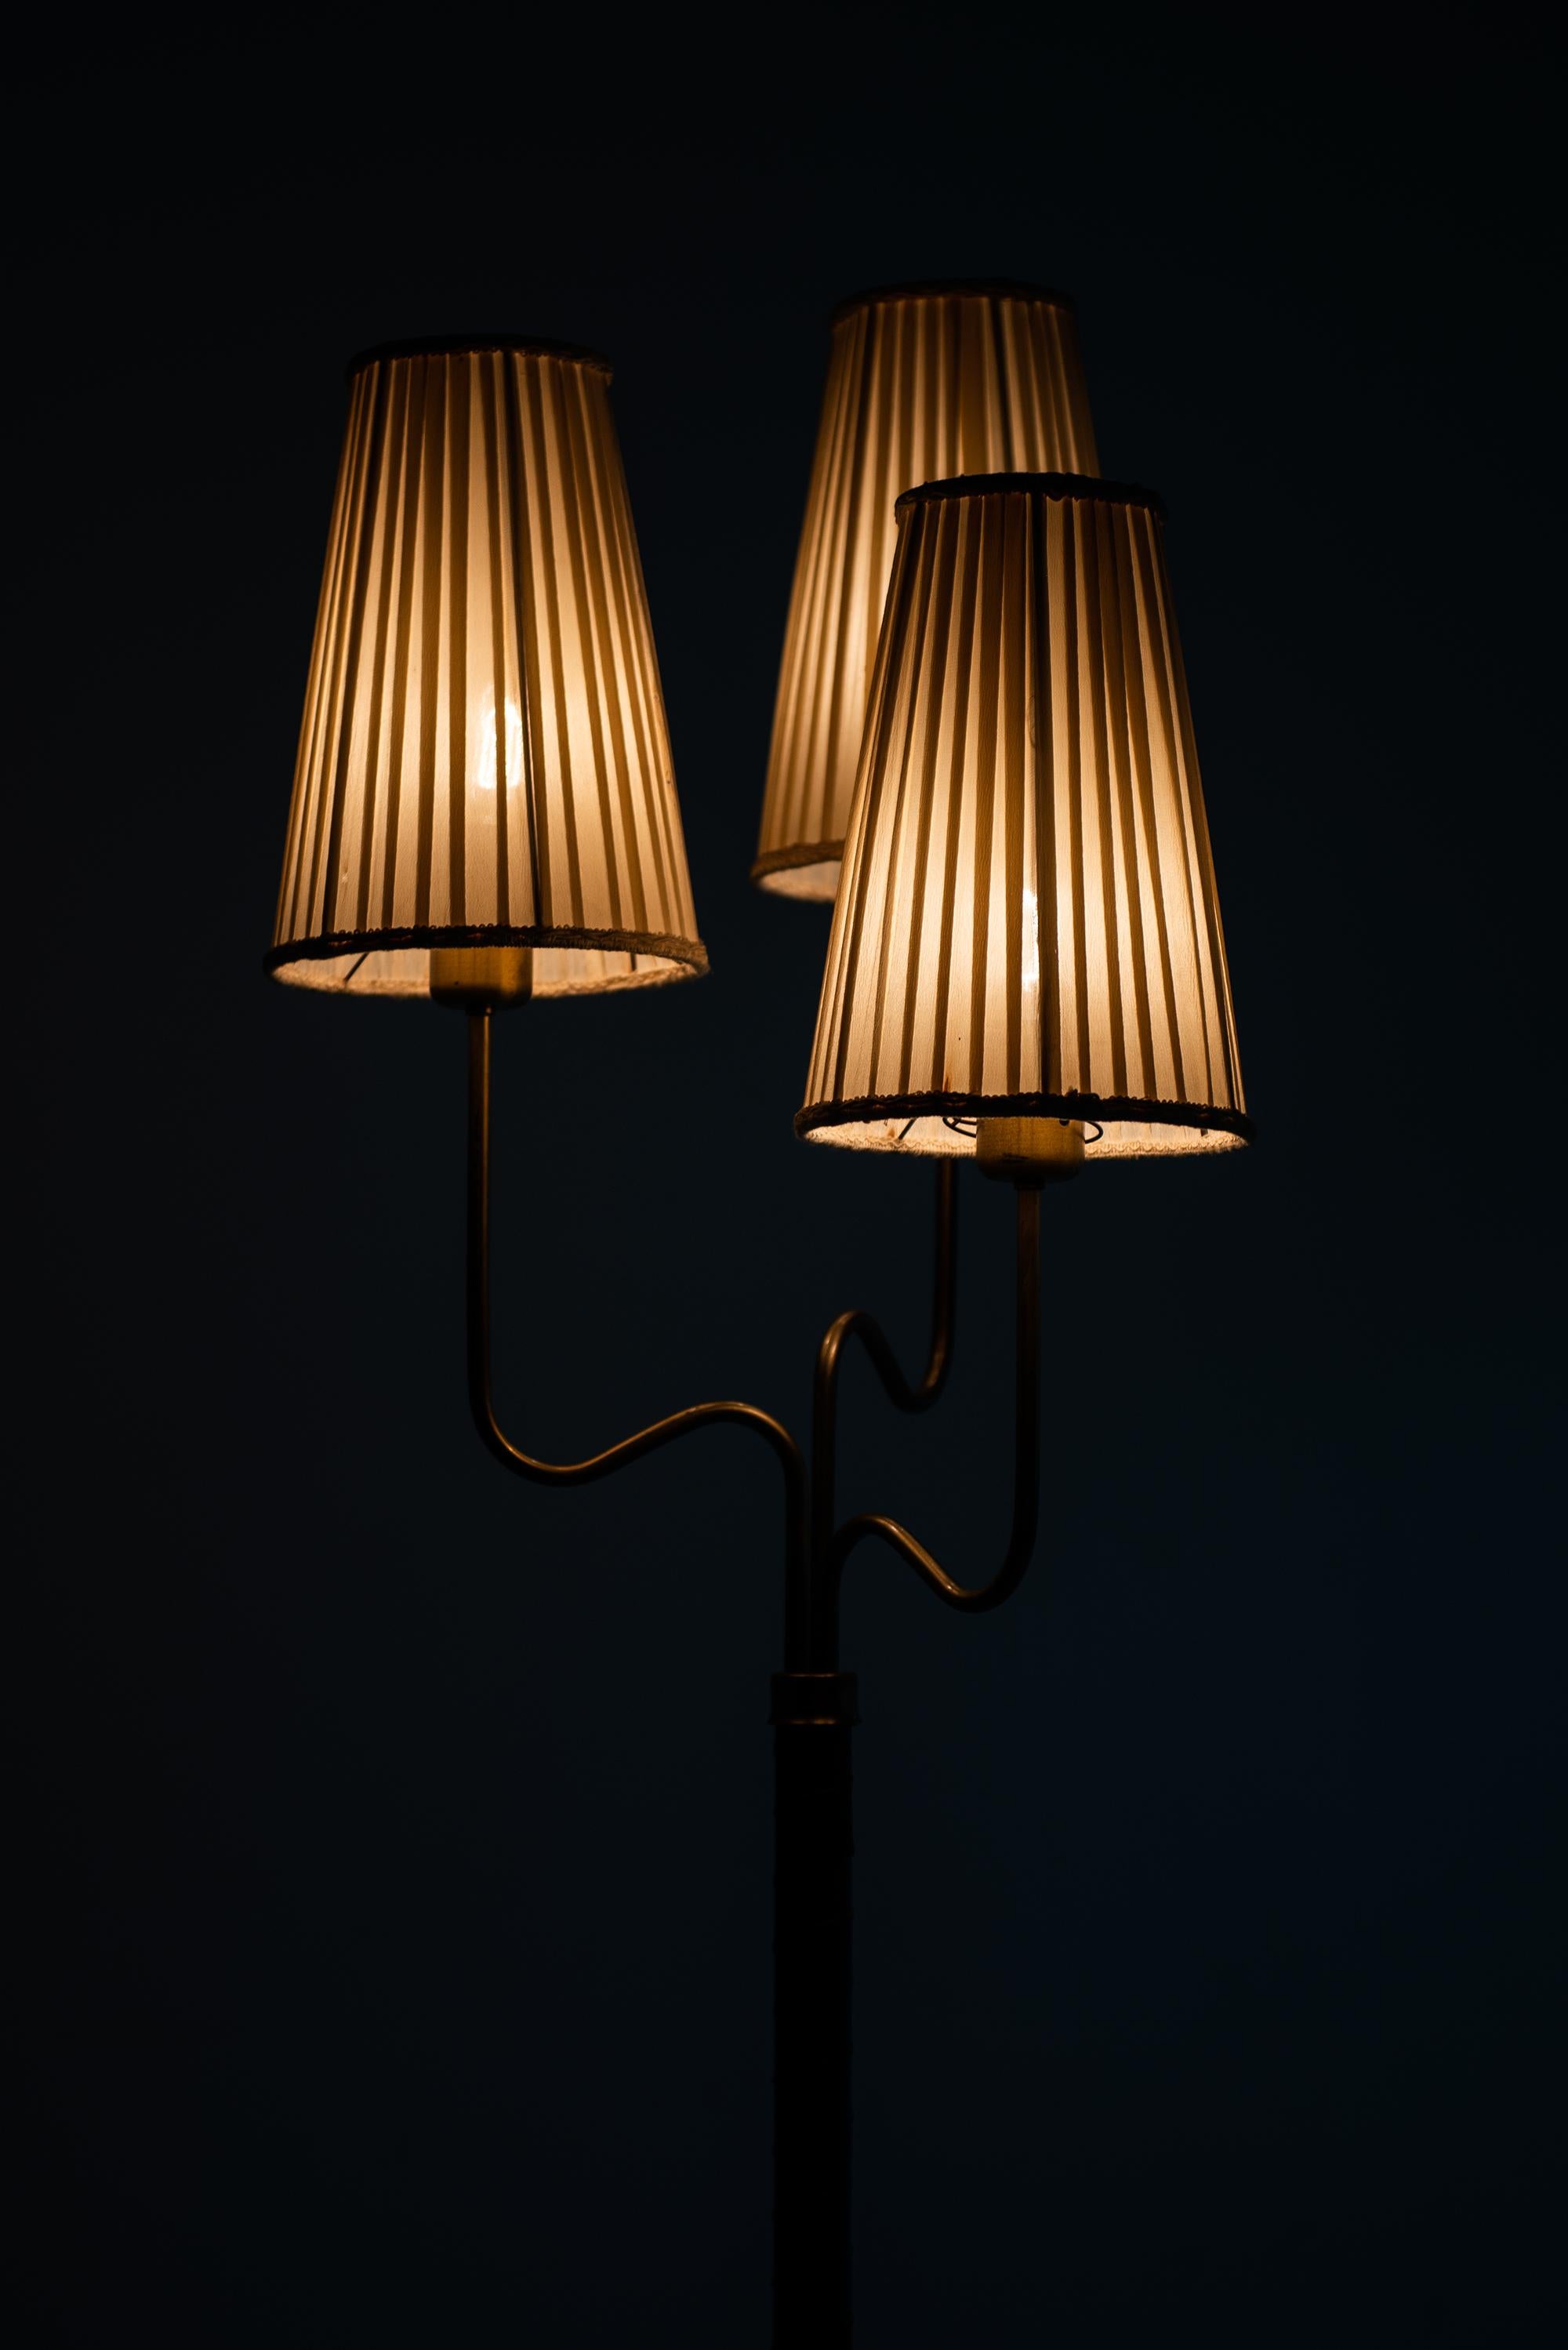 Hans Bergström Floor Lamp with 3 Arms Produced by ASEA in Sweden 1